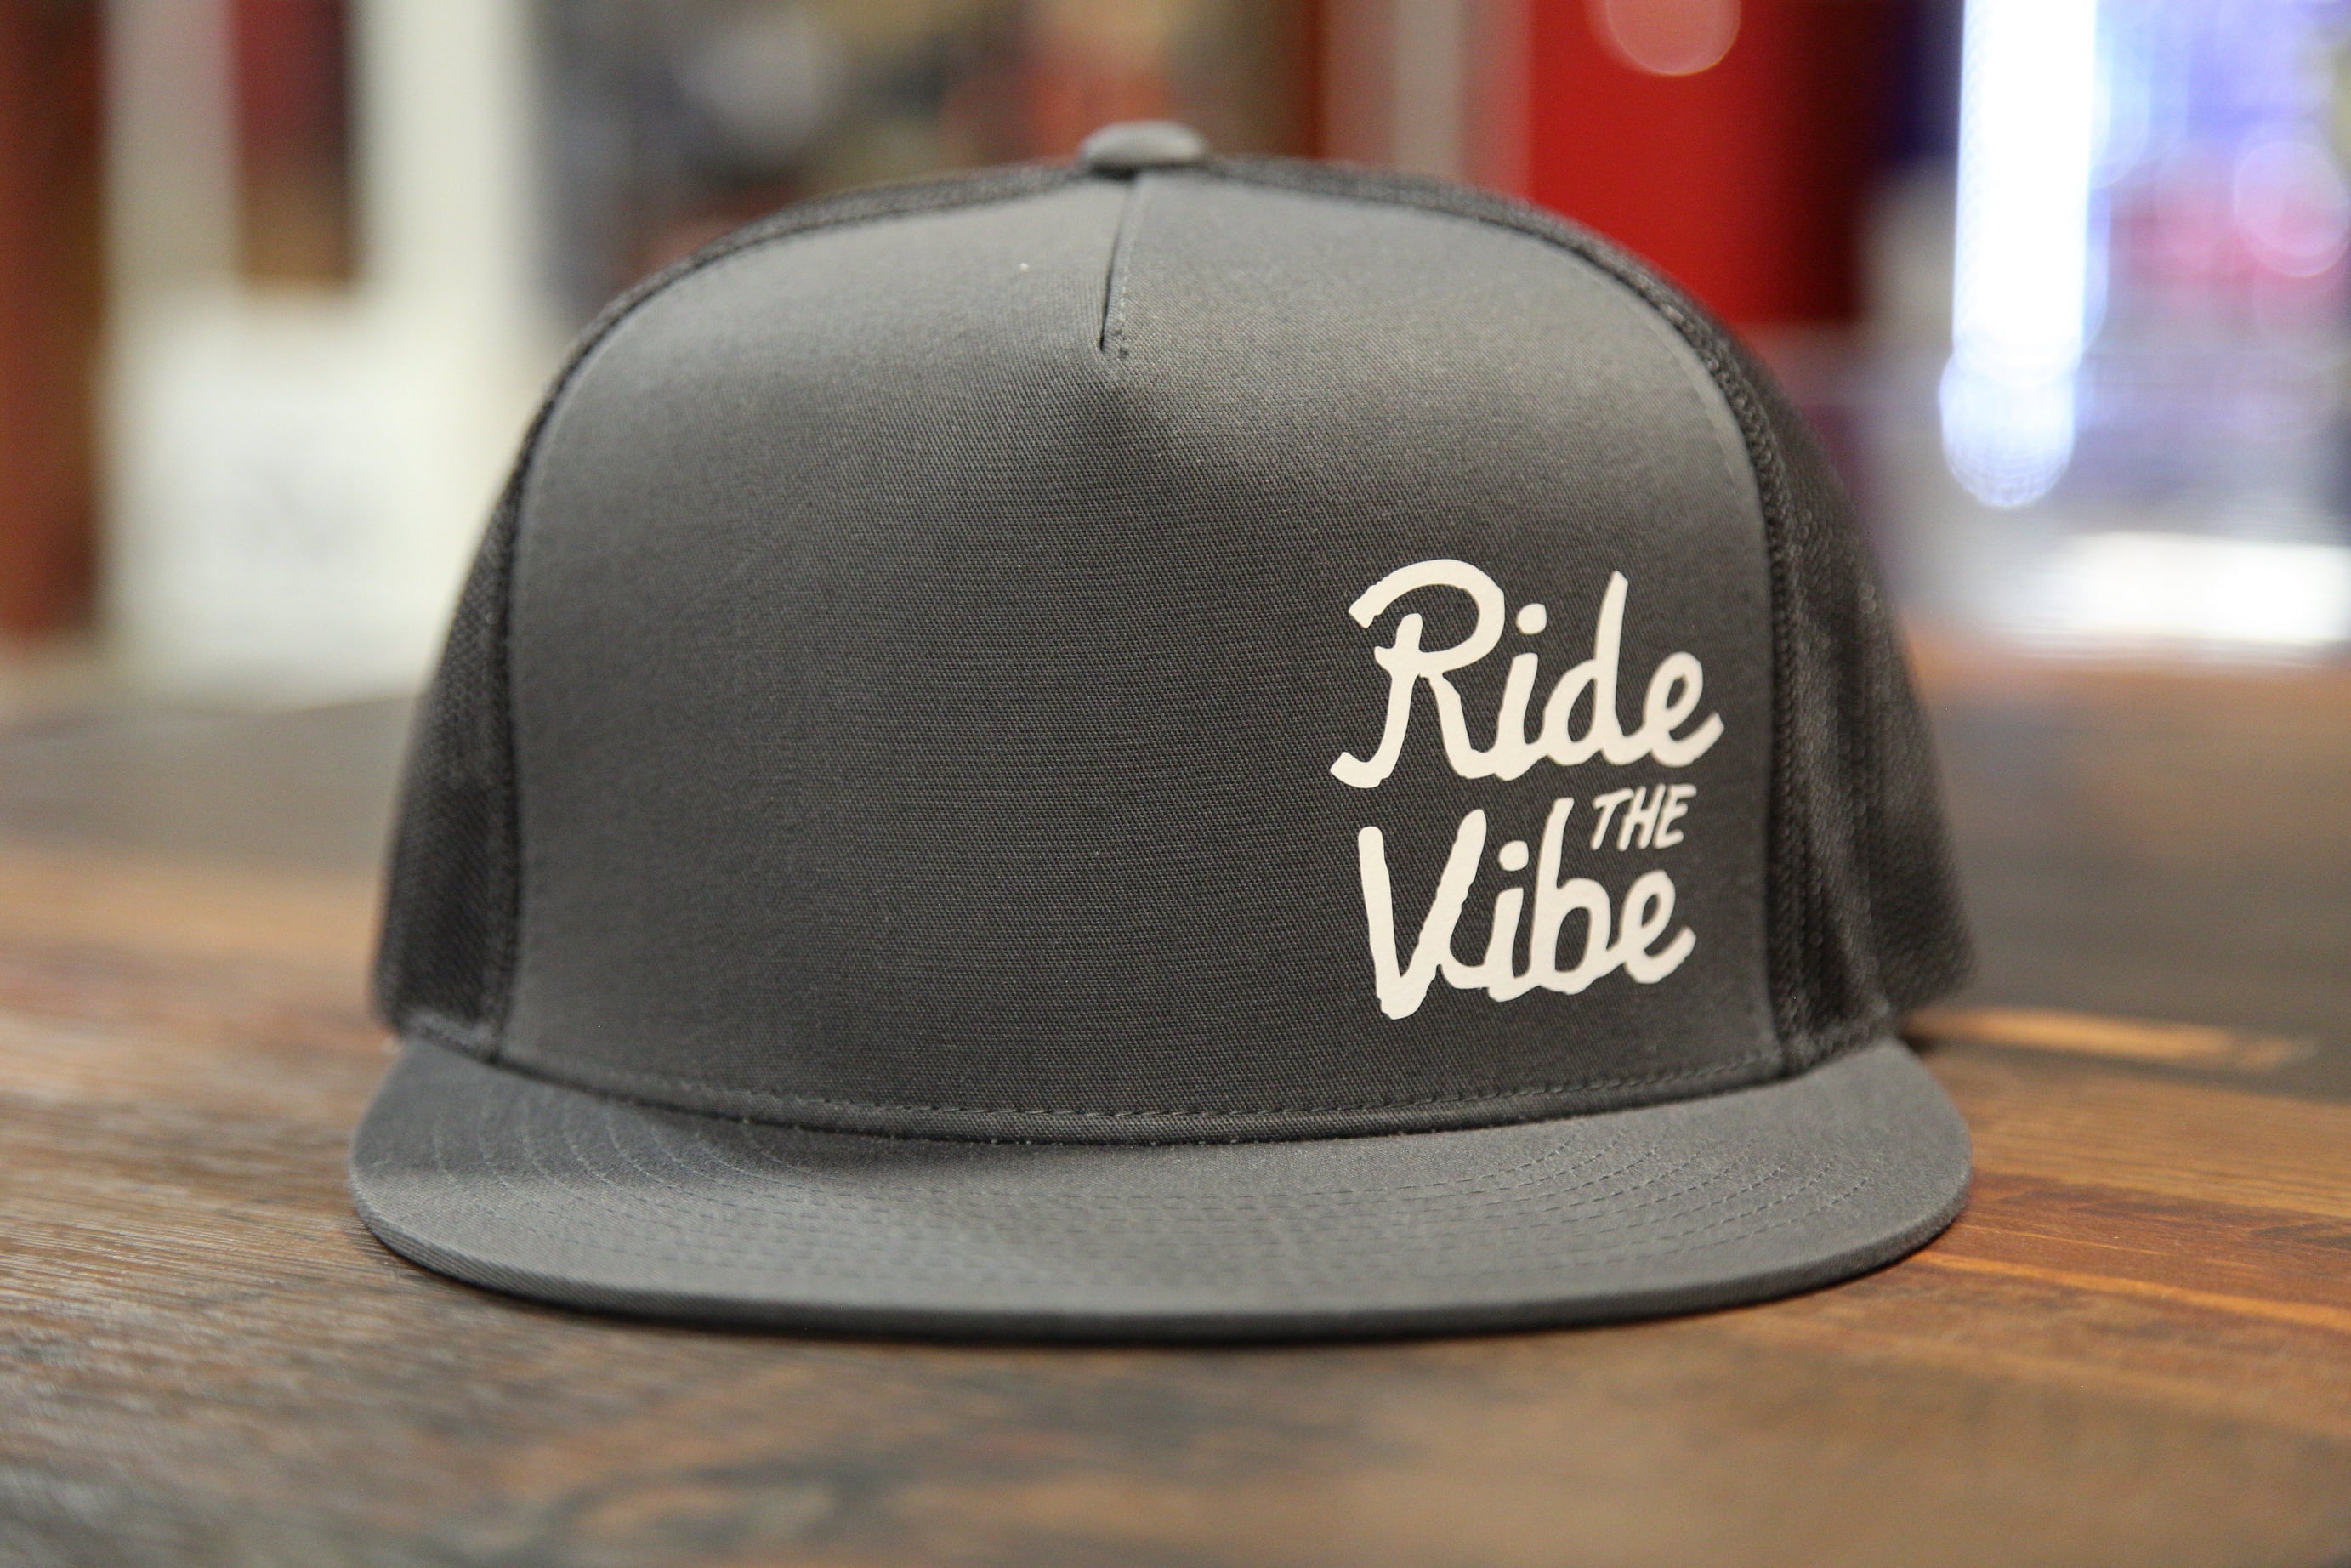 The Classic Snap - Ride The Vibe